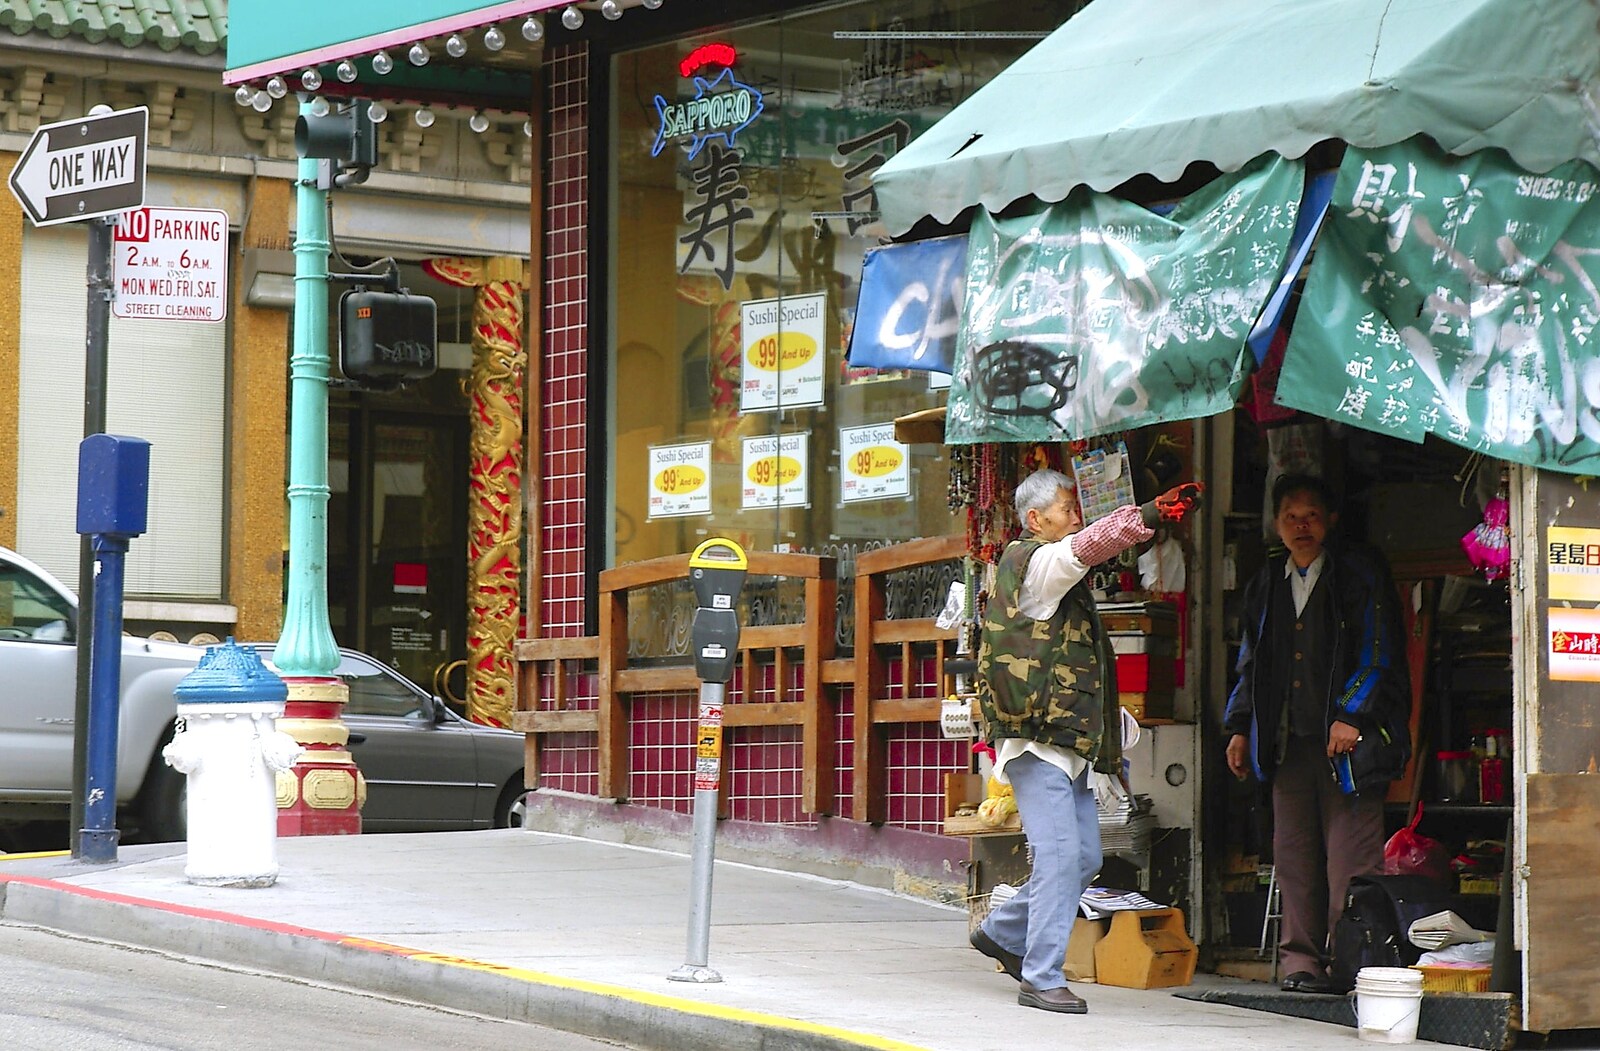 A shopkeeper opens up from Chinatown, Telegraph Hill and Fisherman's Wharf, San Francisco, California, US - 11th March 2006